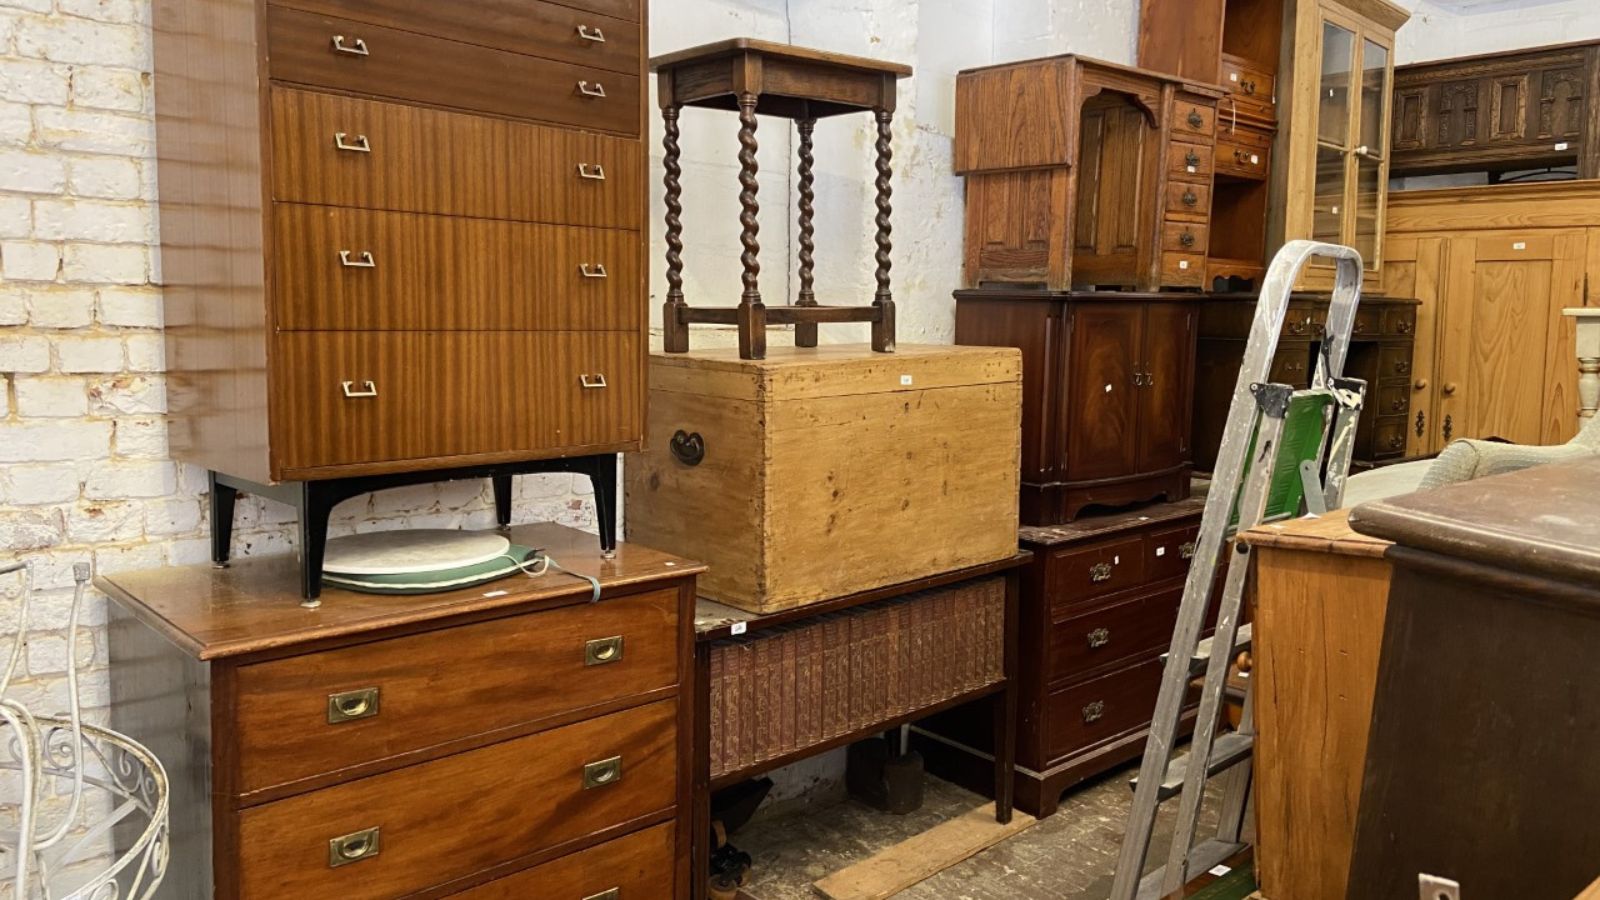 How to Tell if Old Furniture is Valuable